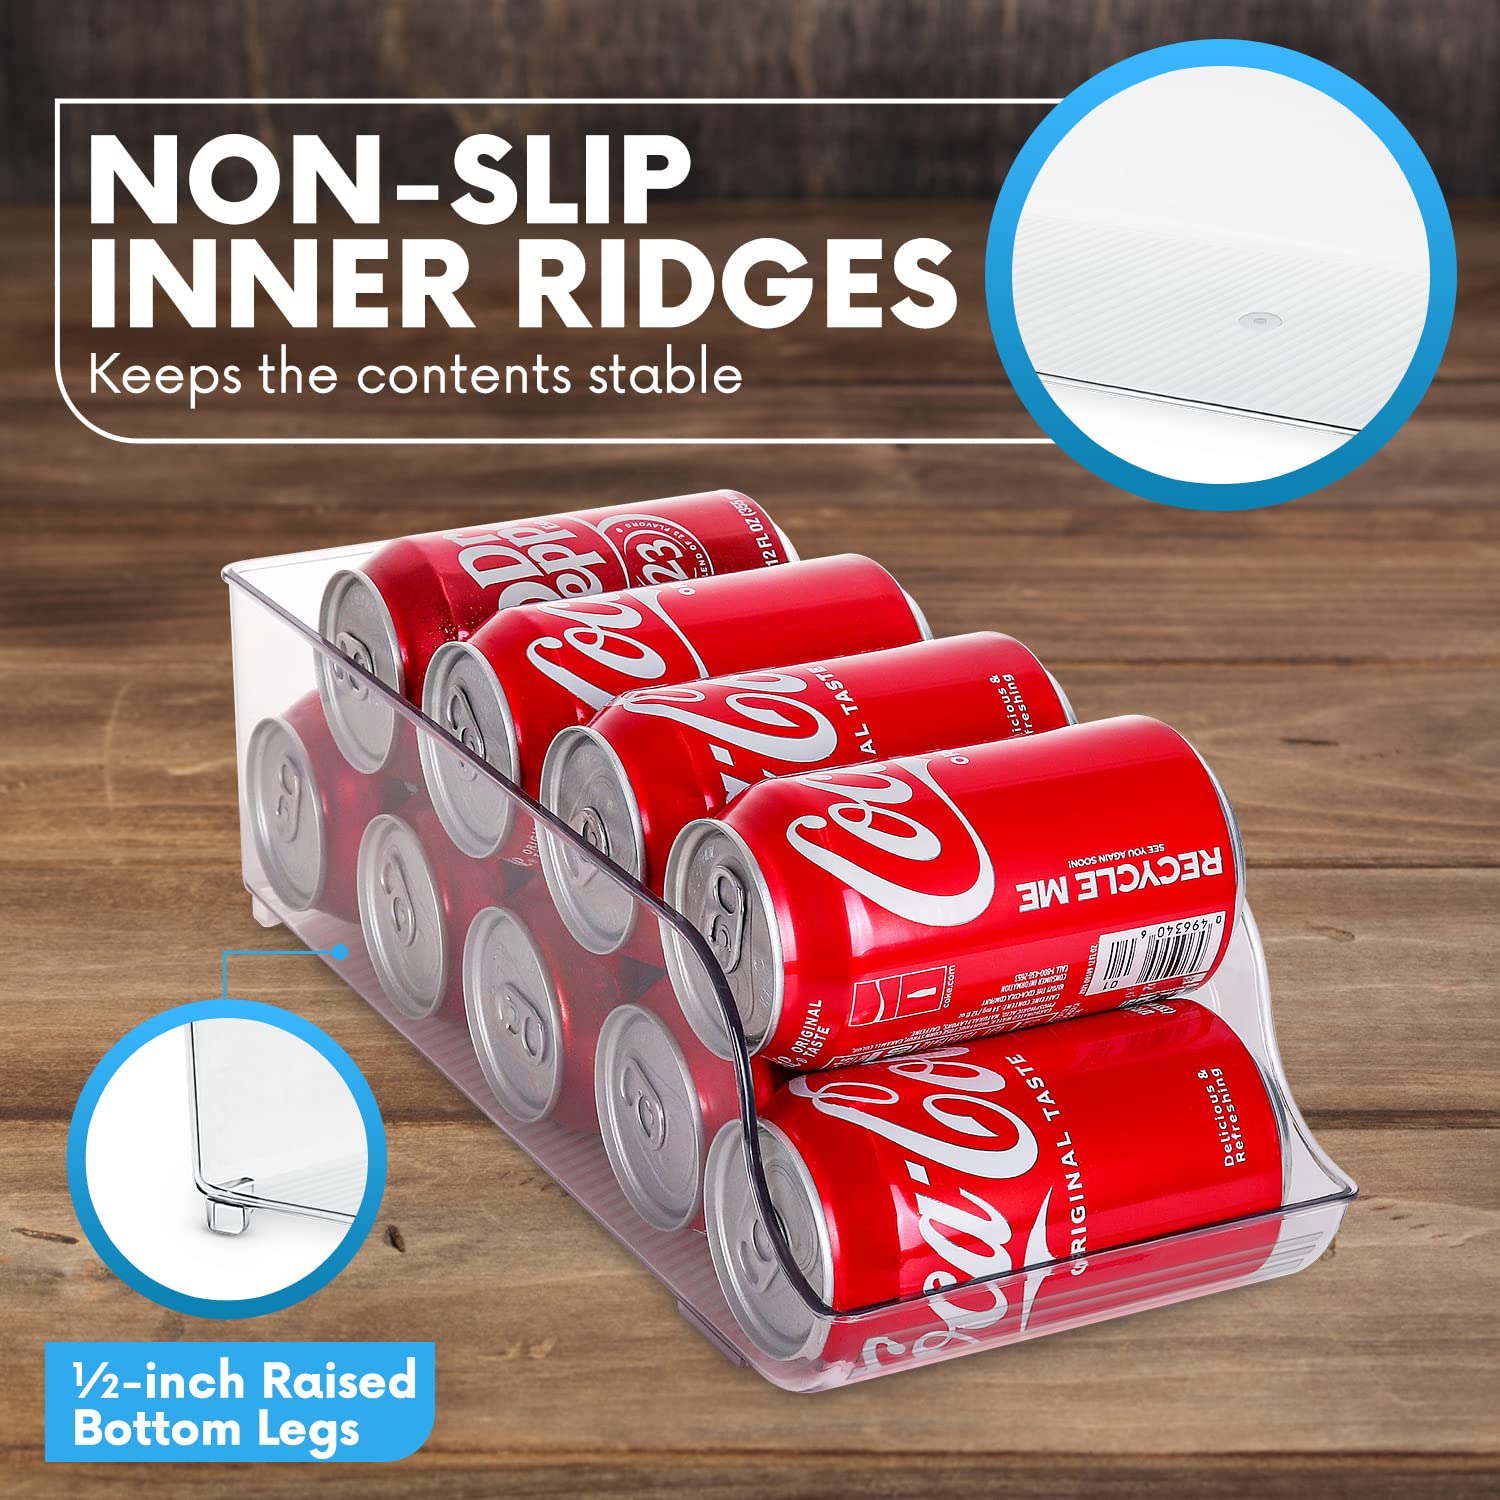 Soda Can Organizer for Pantry/Refrigerator Pack of 6 - Holds Up To 9 Cans (7oz) - Beverage & Canned Food Organizer By Homeries  - Acceptable